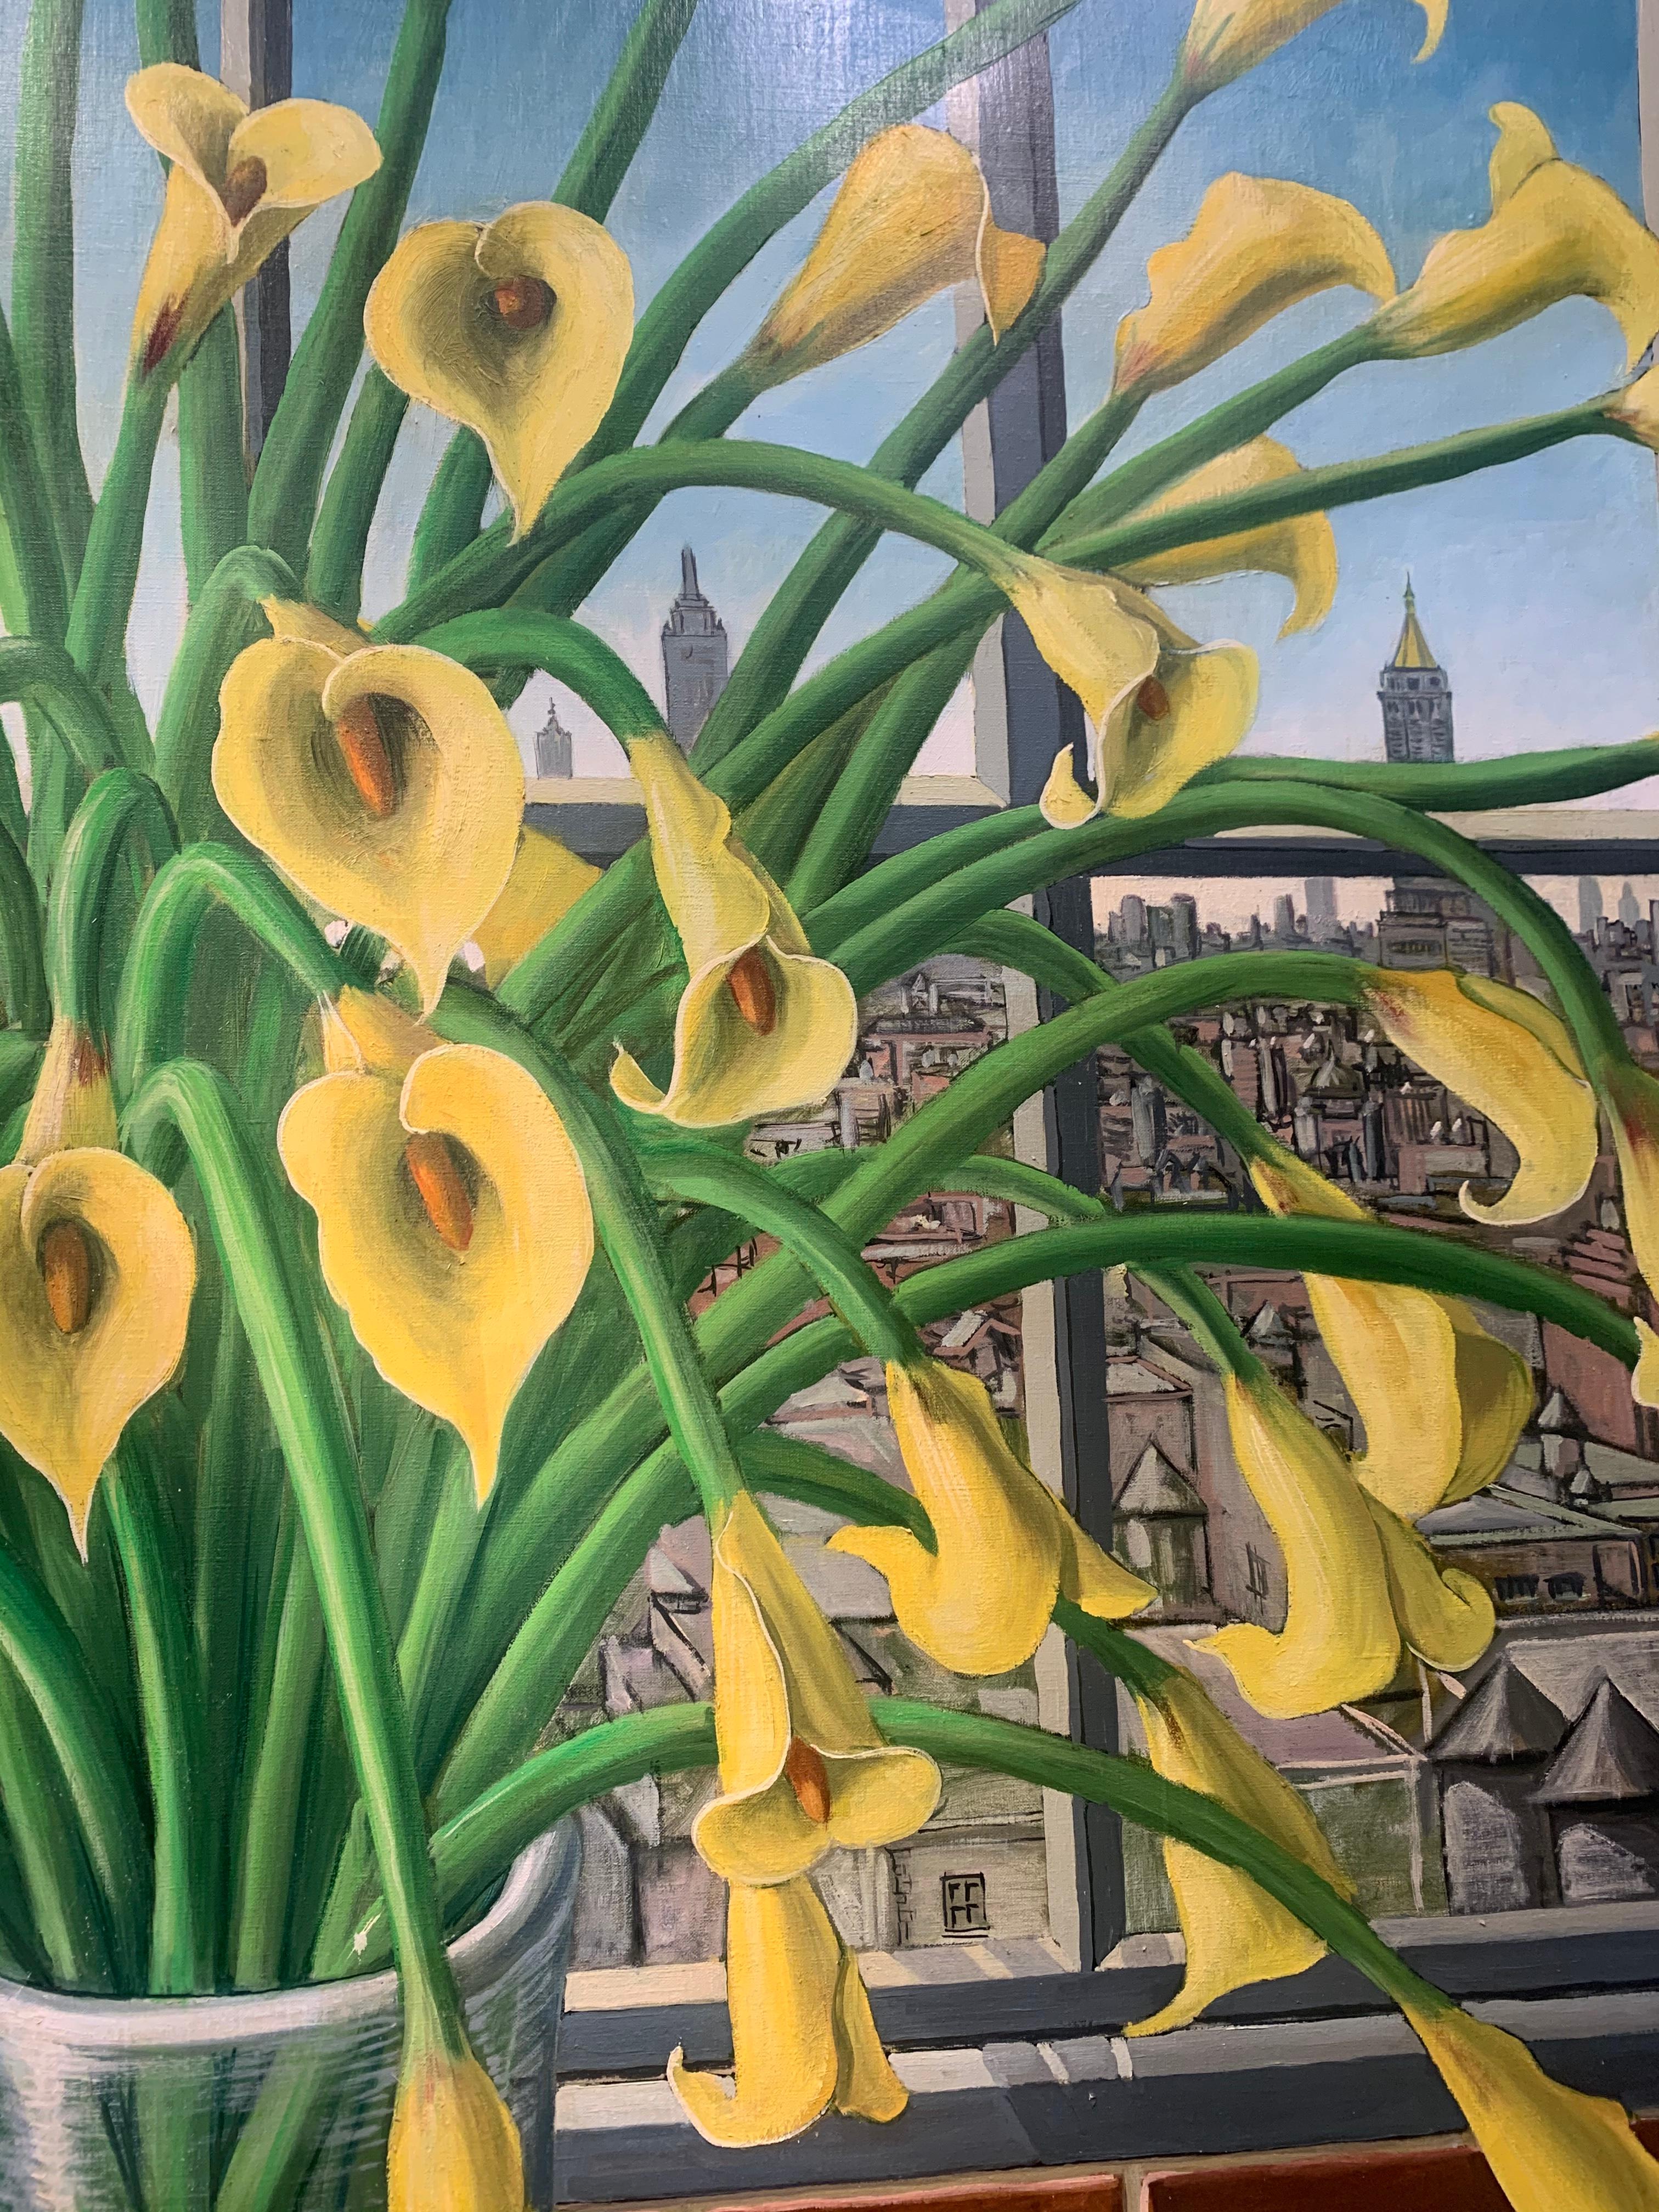  Large Yellow Lilies By The Window In New York  - Photograph by Rafael Saldarriaga